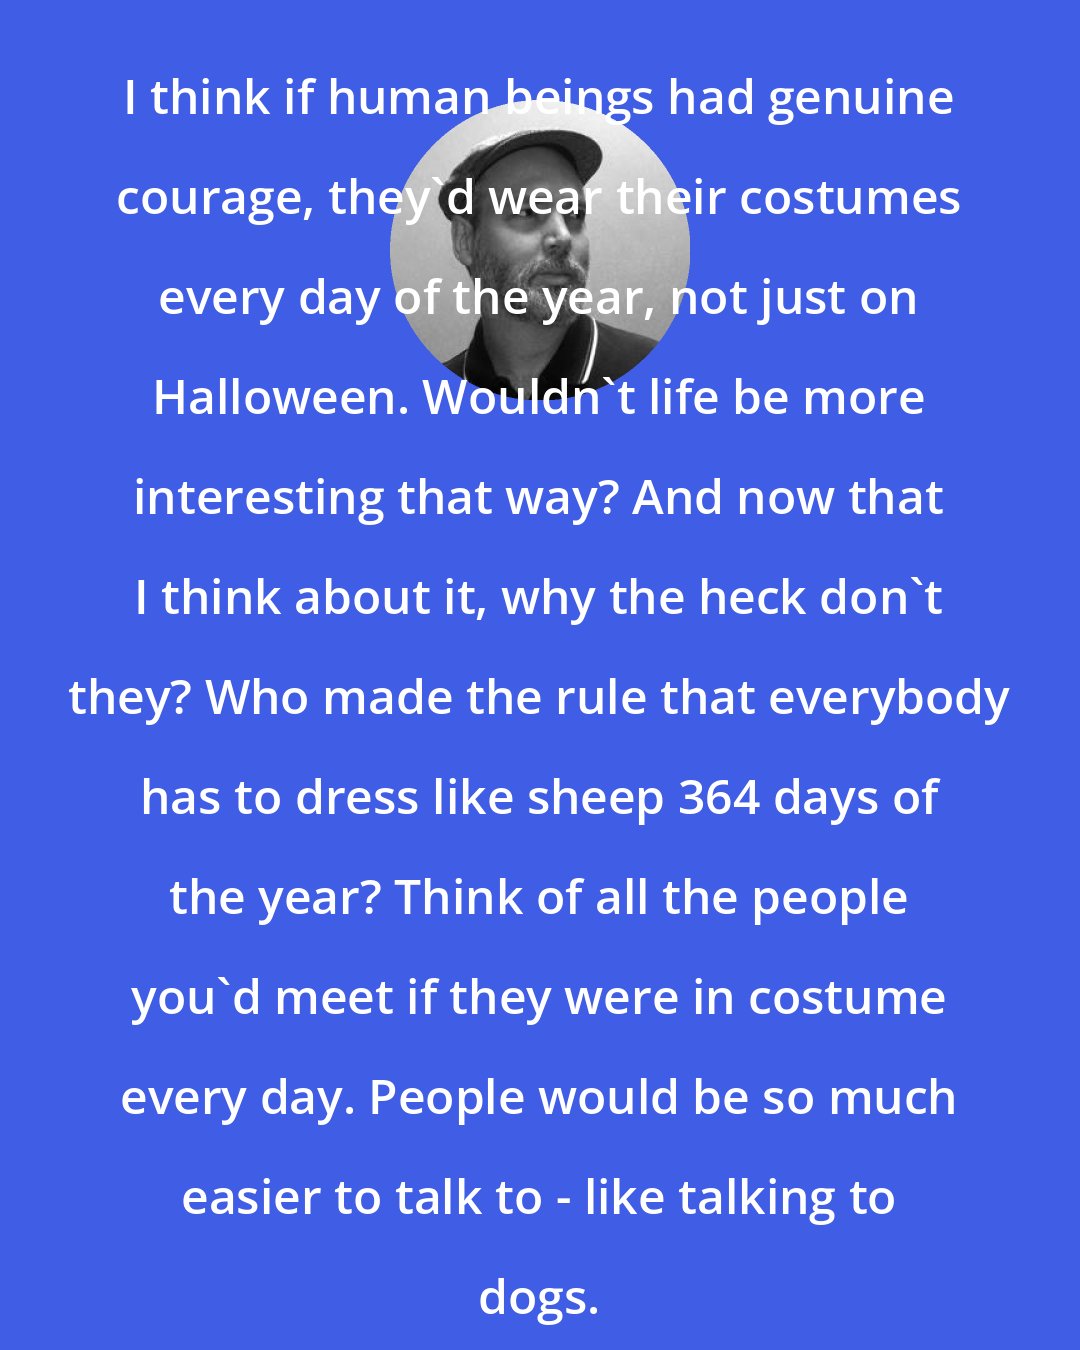 Douglas Coupland: I think if human beings had genuine courage, they'd wear their costumes every day of the year, not just on Halloween. Wouldn't life be more interesting that way? And now that I think about it, why the heck don't they? Who made the rule that everybody has to dress like sheep 364 days of the year? Think of all the people you'd meet if they were in costume every day. People would be so much easier to talk to - like talking to dogs.